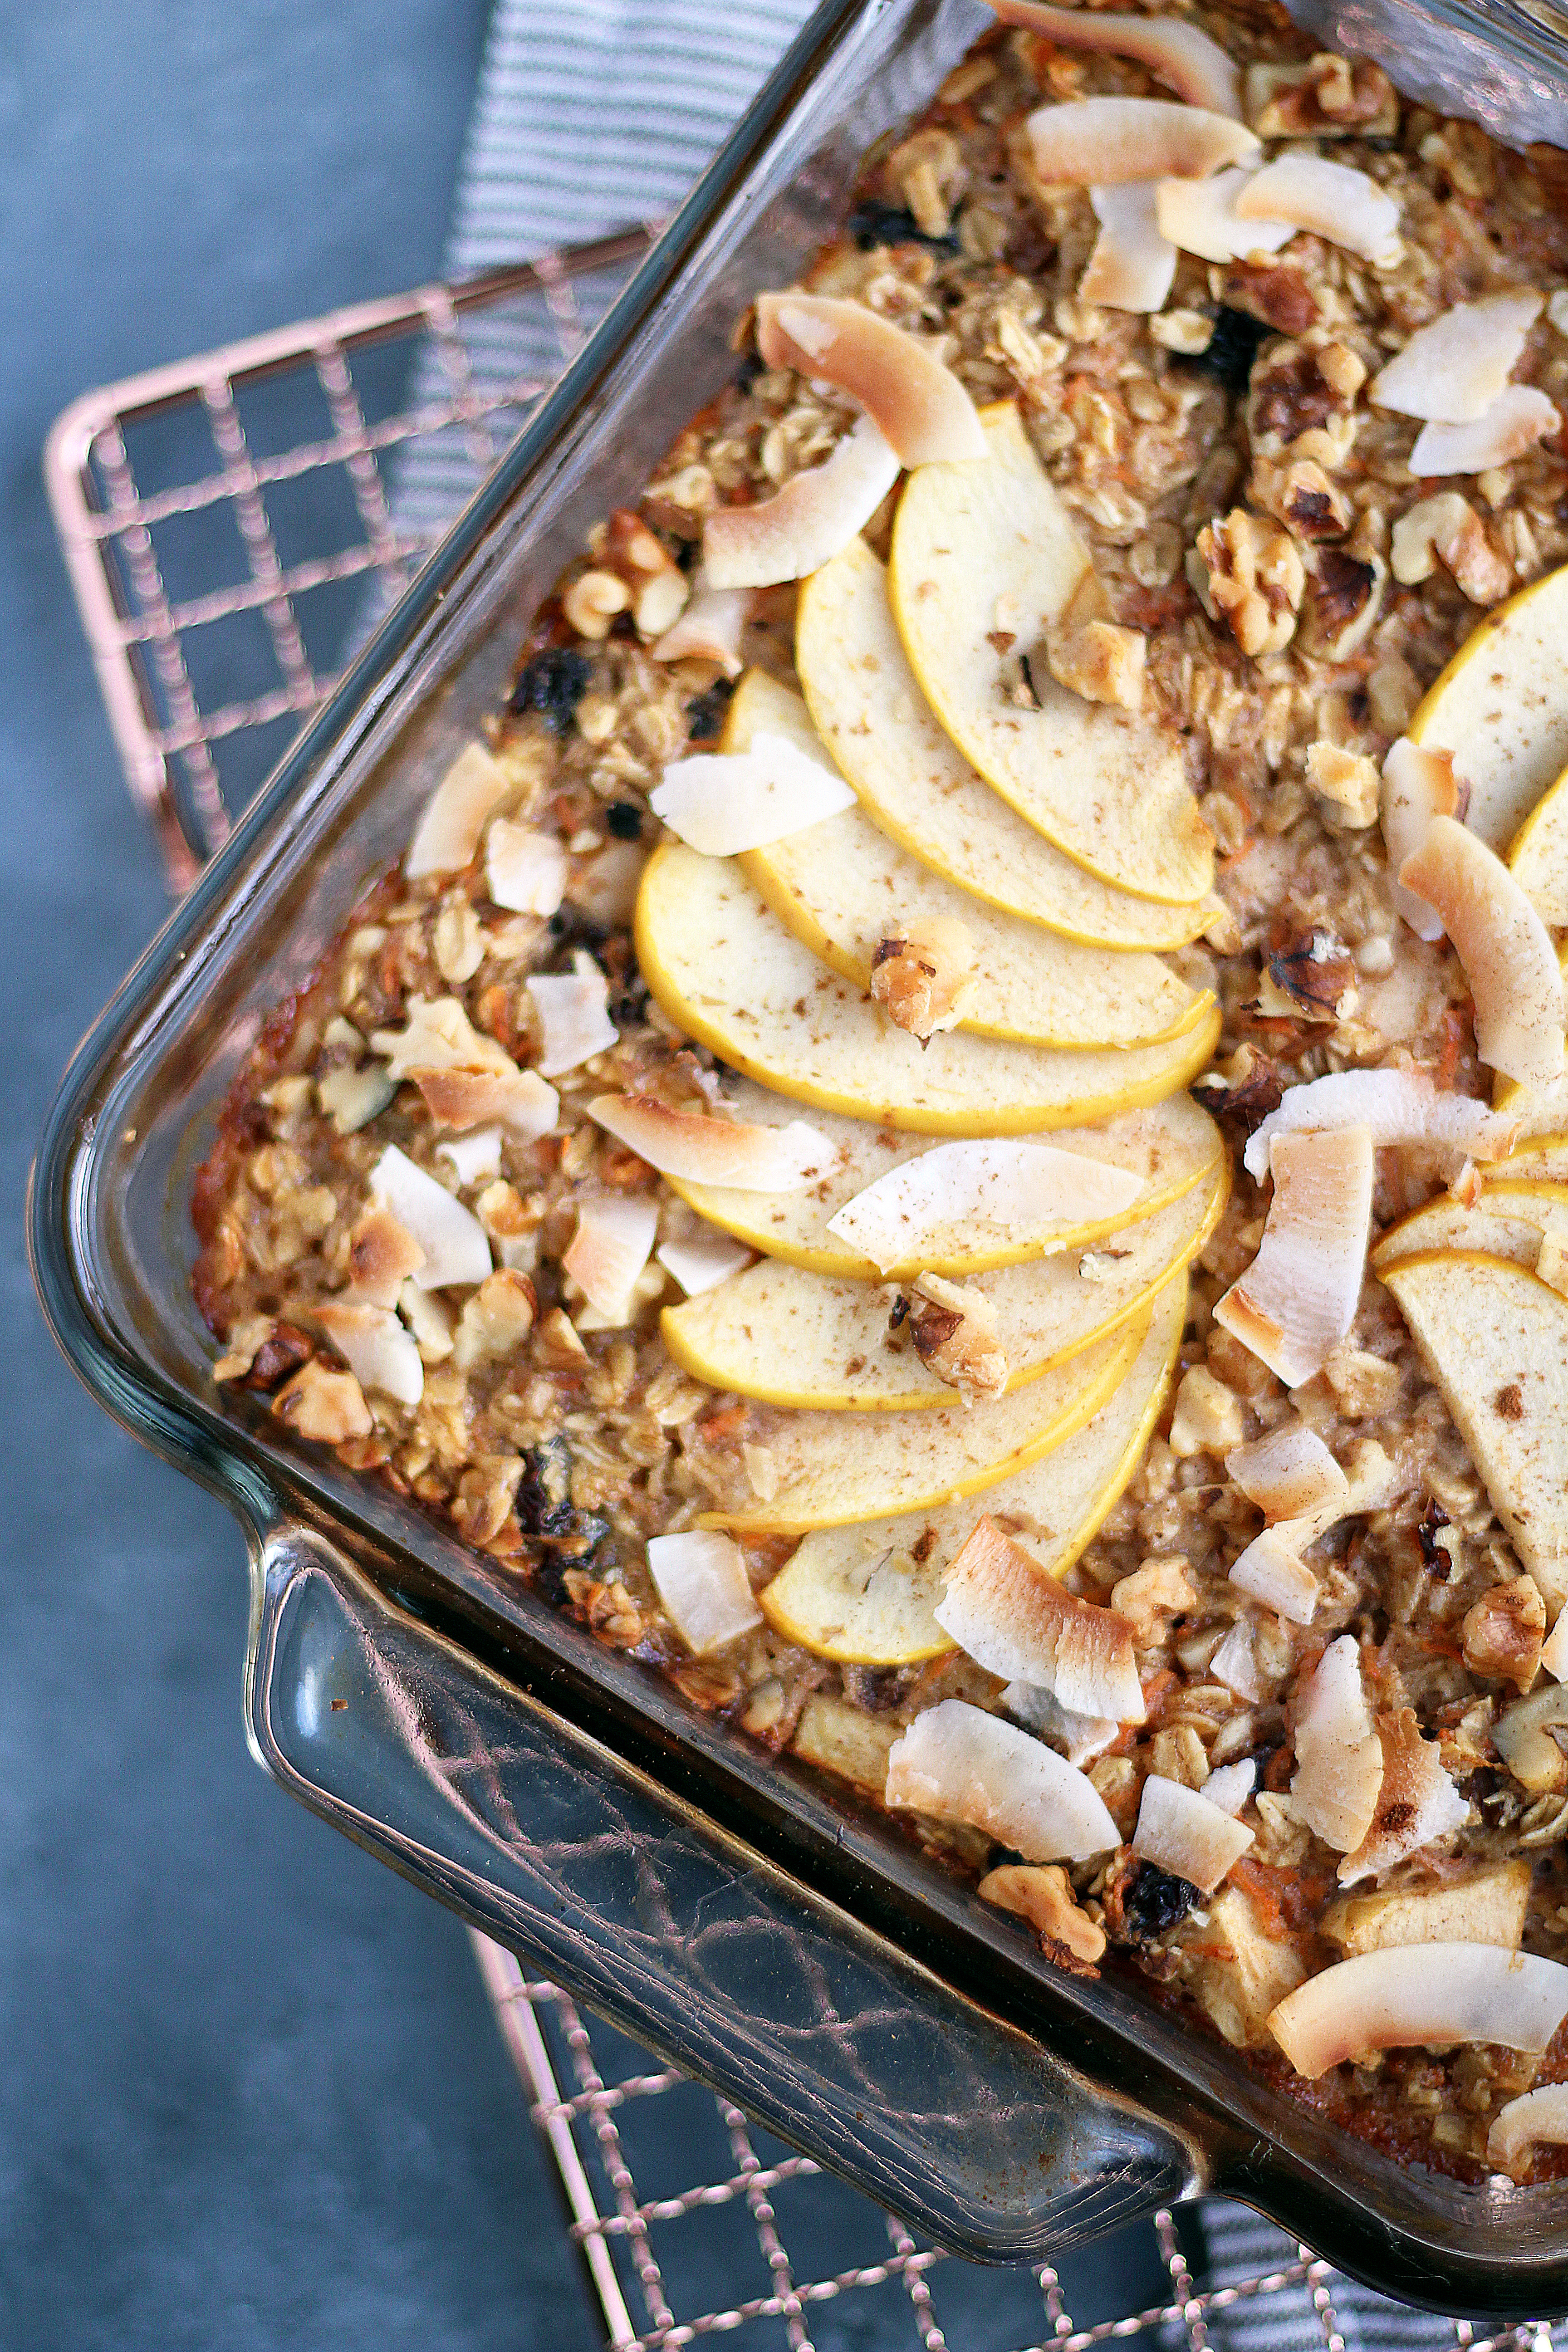 Morning Glory Baked Oatmeal. Loaded with coconut, carrot, raisins, and walnuts, and perfect for meal prep!